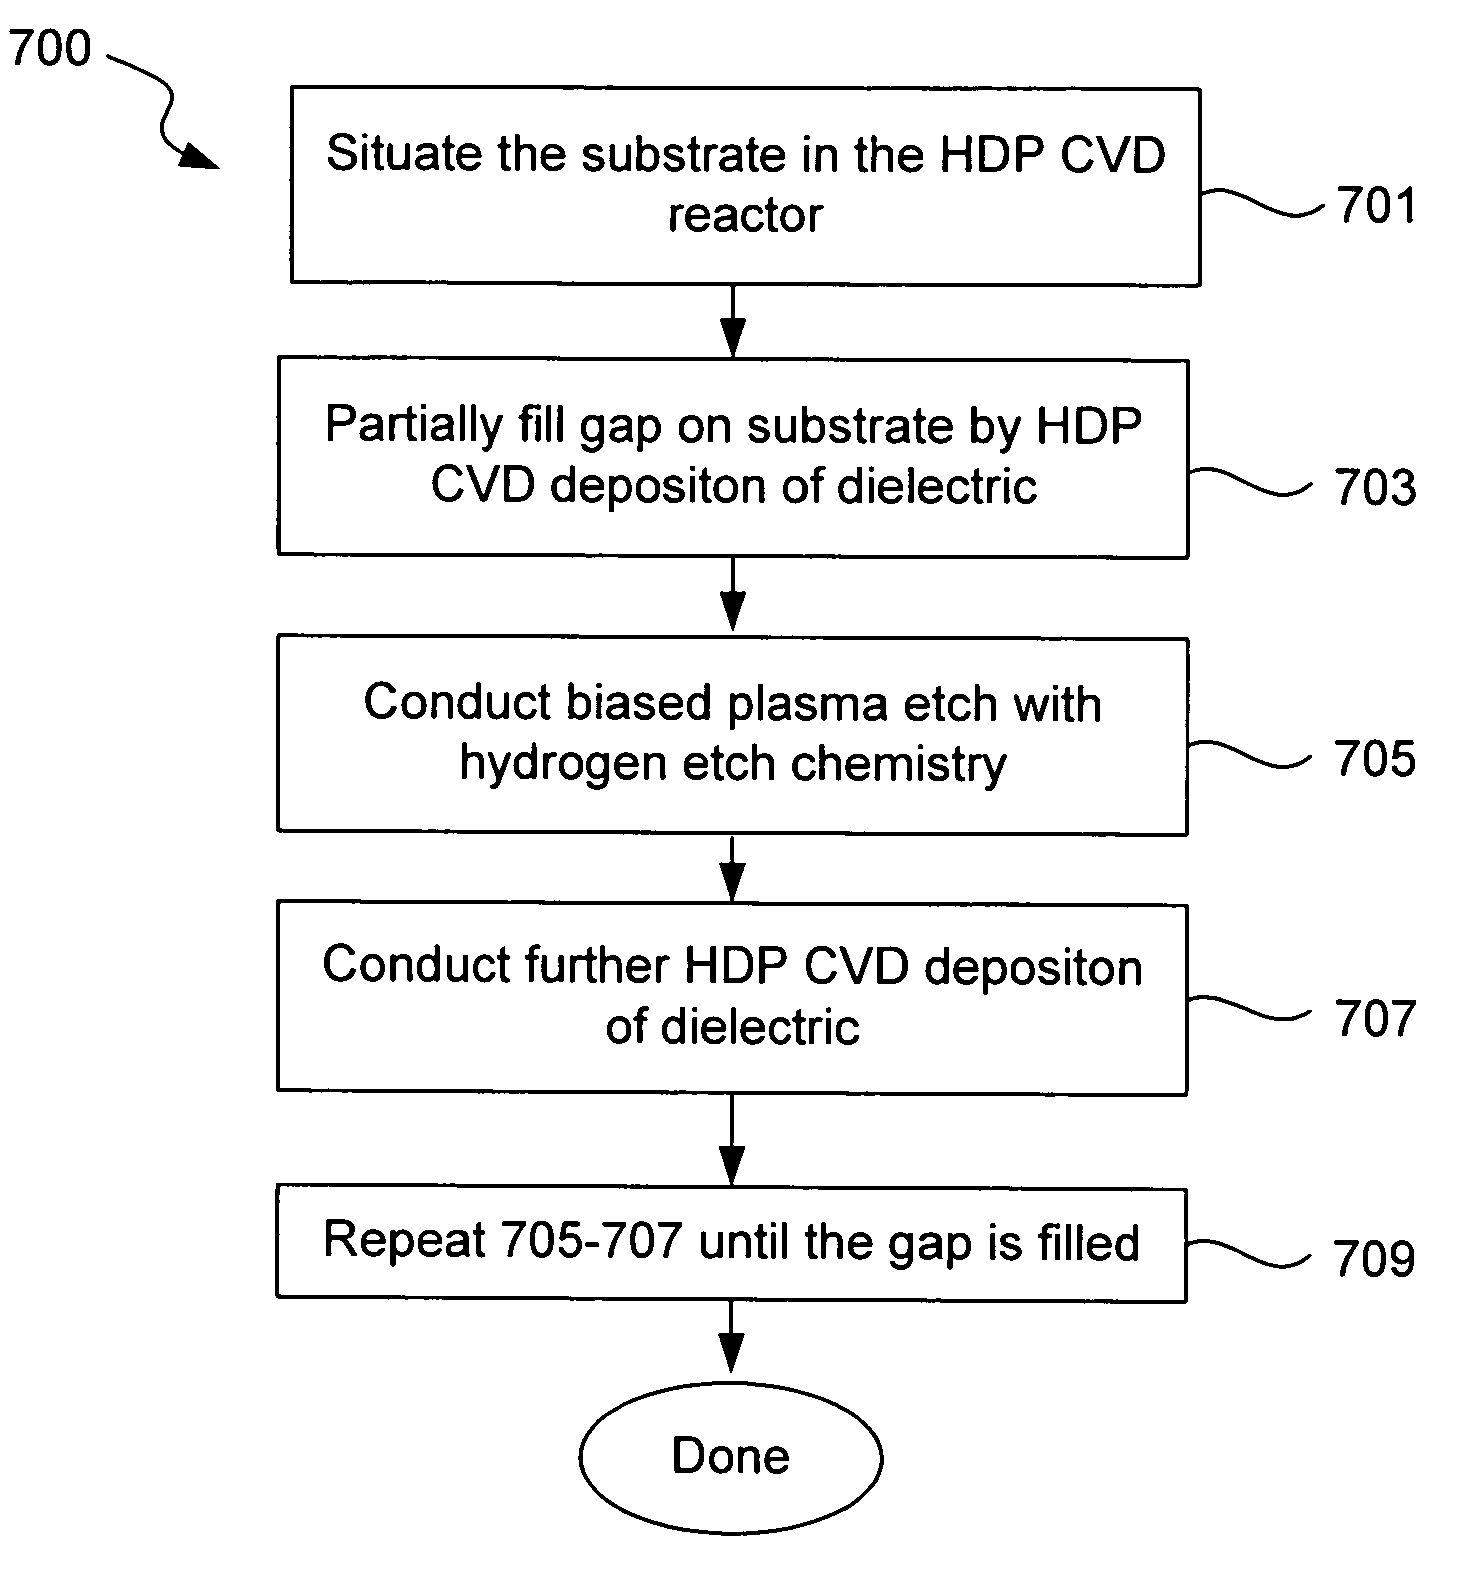 Biased H2 etch process in deposition-etch-deposition gap fill